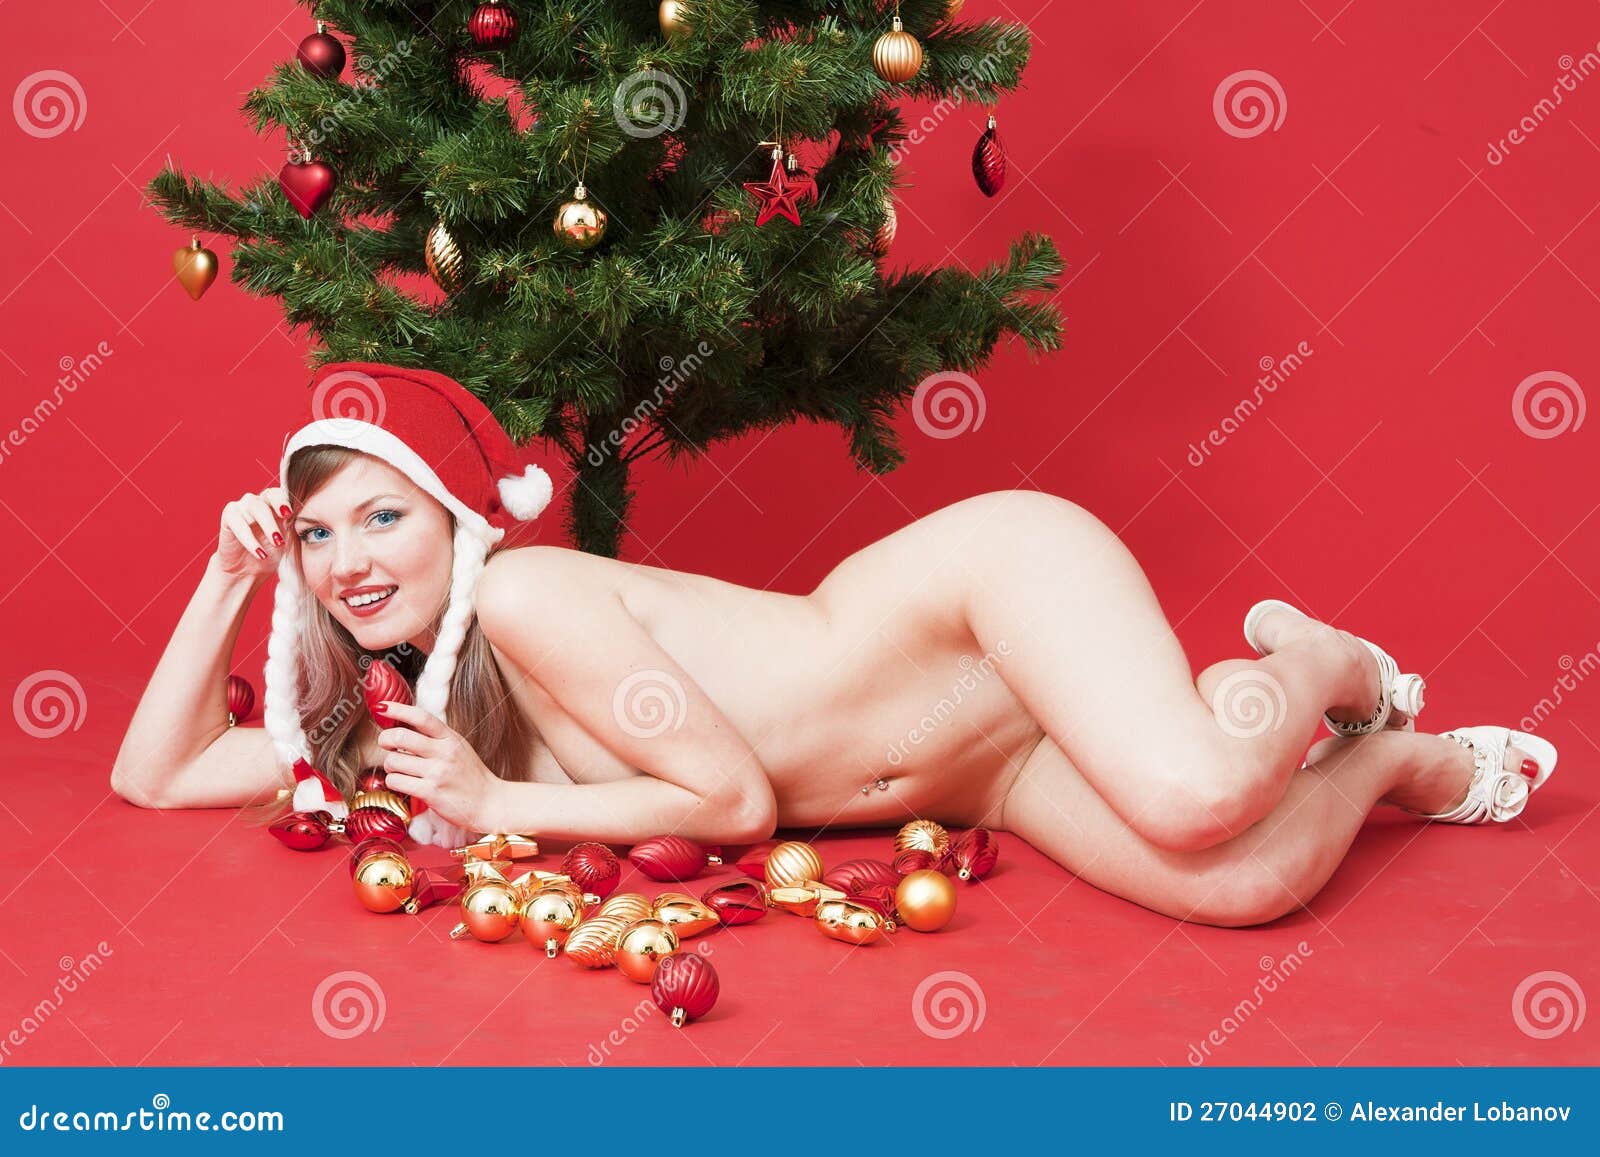 corey james smith recommends naked under the christmas tree pic